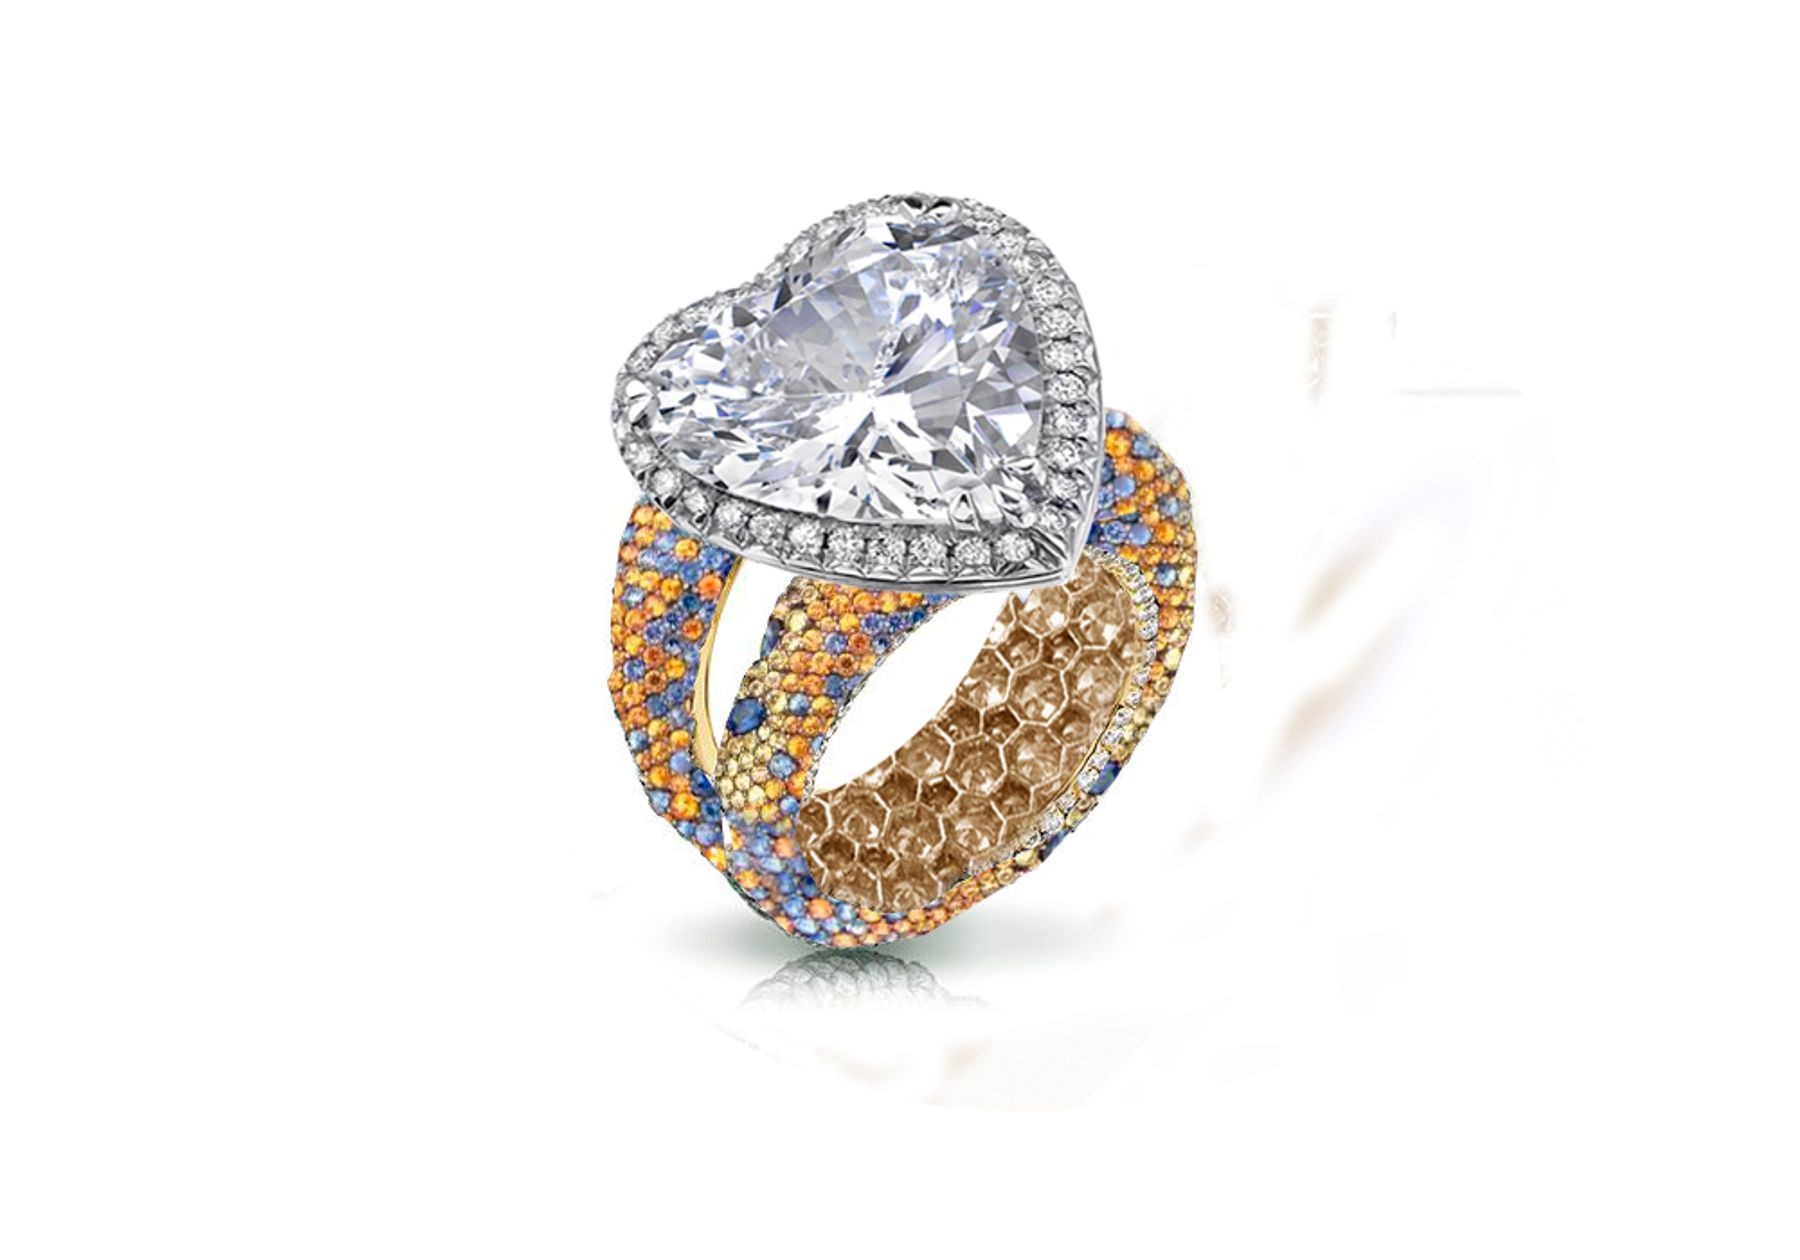 Halo Heart Diamond Ring with Diamonds & Rainbow Sapphires in Gold or Platinum